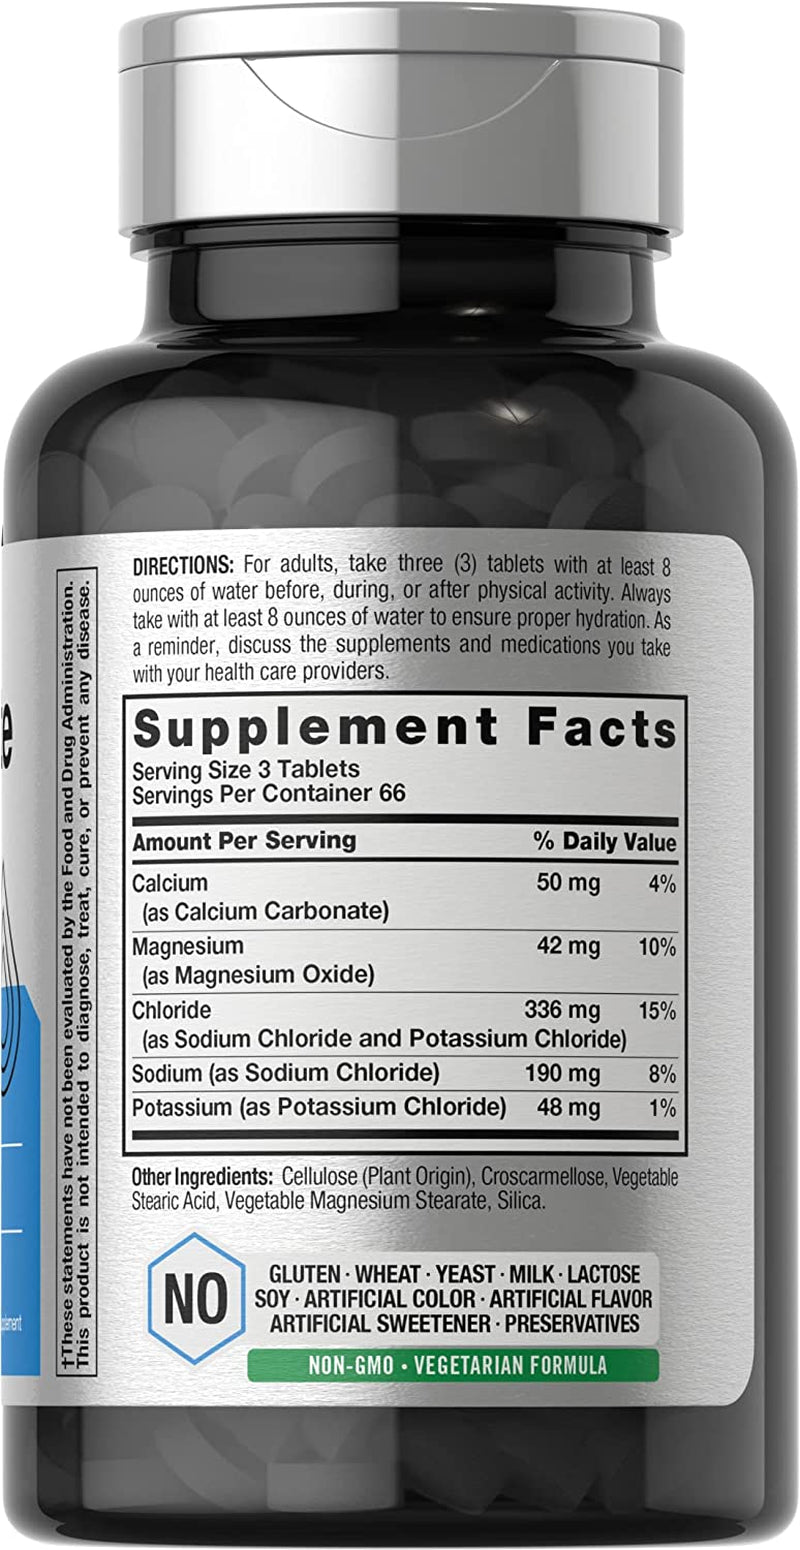 Electrolyte Tablets | 200 Count | Vegetarian | Keto-Friendly | Non-Gmo, and Gluten Free Hydration Supplement | by Horbaach